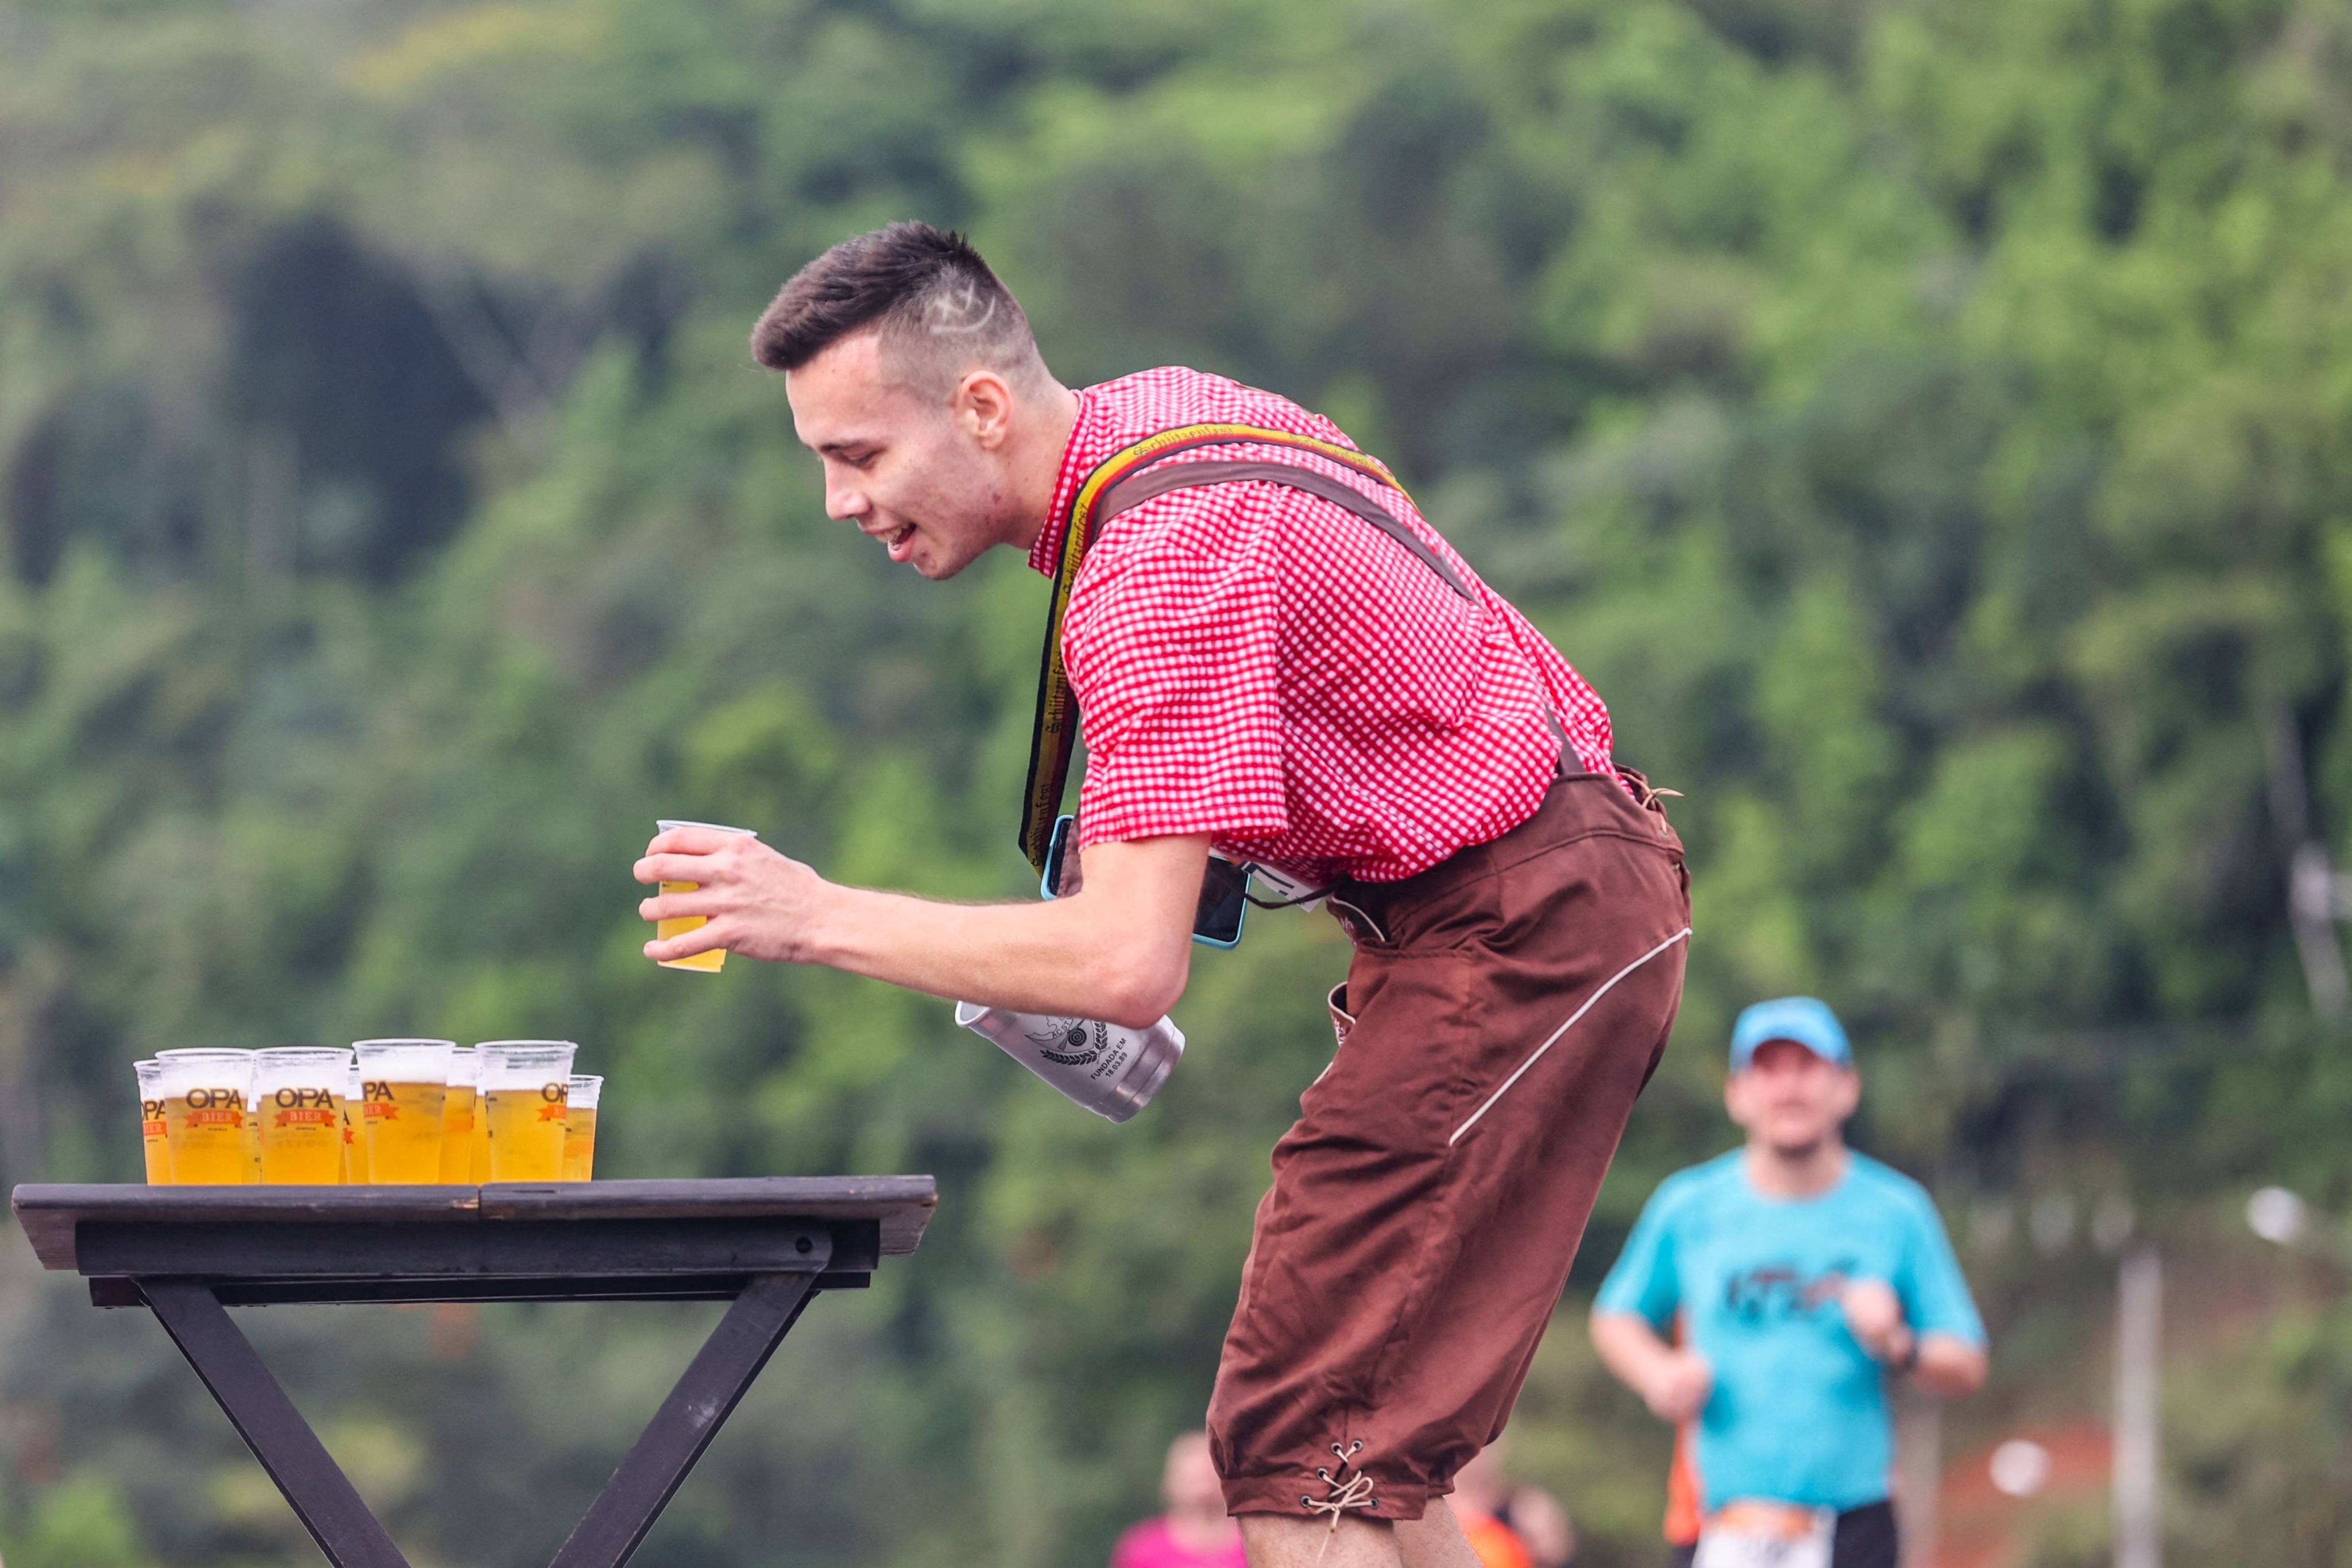 A competitor in Oktoberfest costume grabs a beer during a half-marathon race in Pomerode, one of Brazil’s oldest German settlements, on October 22. October is both Breast Cancer Awareness Month and Liver Cancer Awareness Month. Unlike breast cancer, liver cancer is something we can often control through lifestyle changes like drinking responsibly. Photo: AFP 